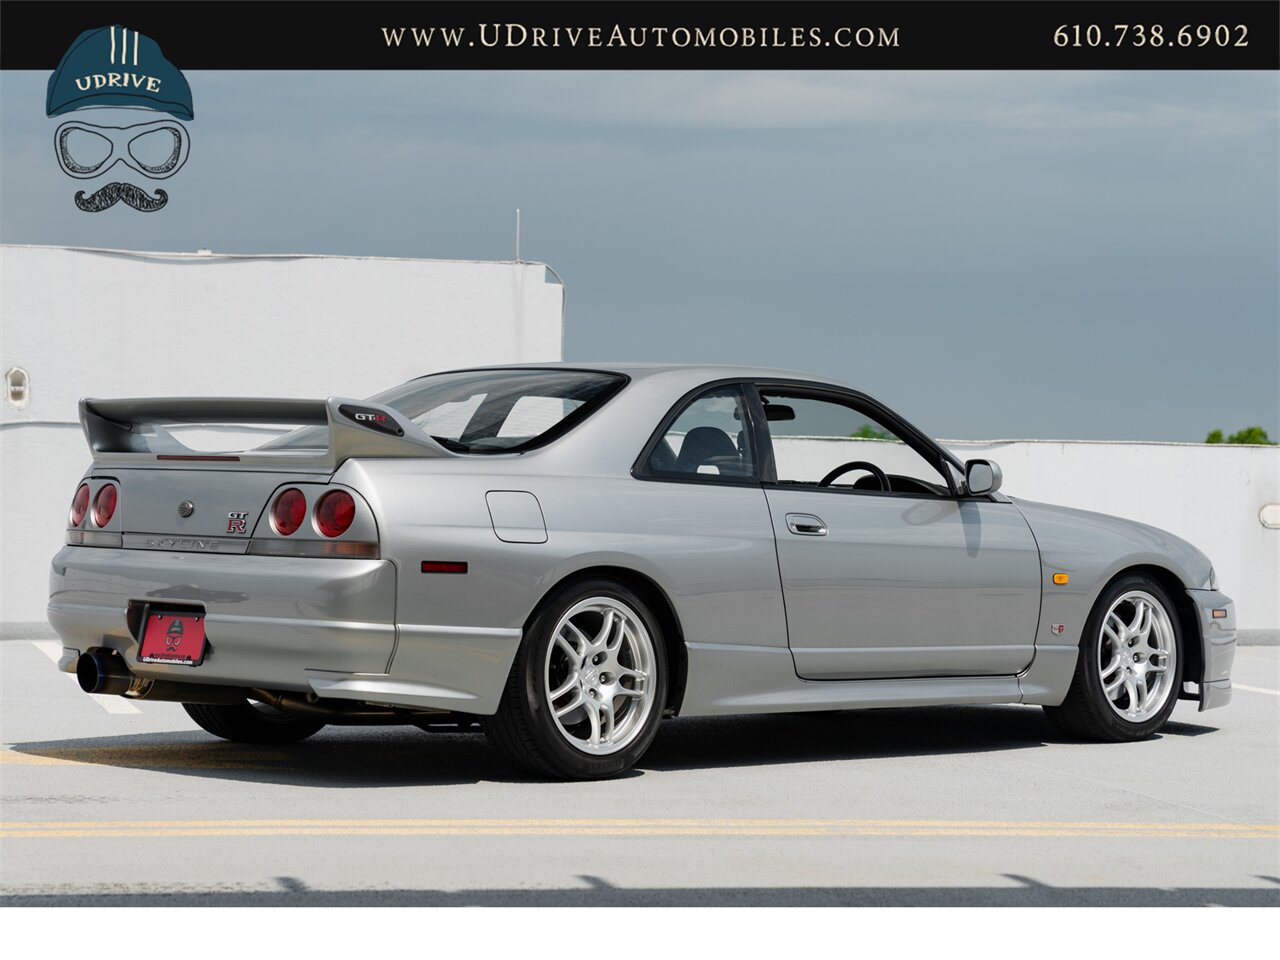 1997 Nissan Skyline GT-R R33 28k Miles Collector Grade  Motorex Legally Imported Titled Federalized Service History - Photo 18 - West Chester, PA 19382